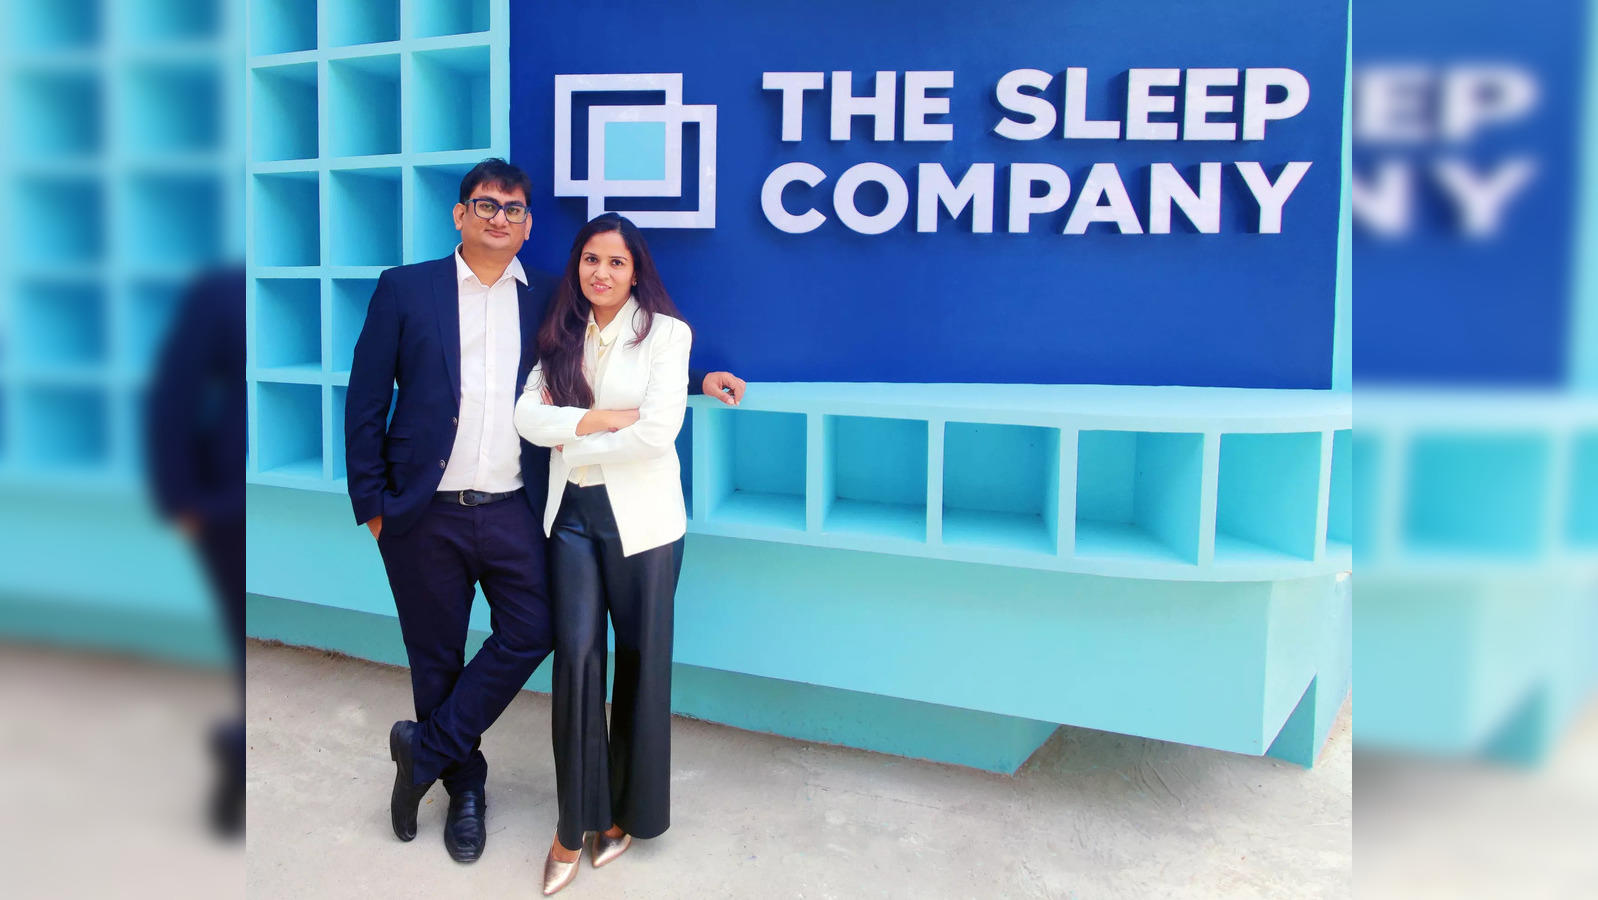 sleep company: D2C startup The Sleep Company raises $21.3 million in round  led by Premji Invest - The Economic Times